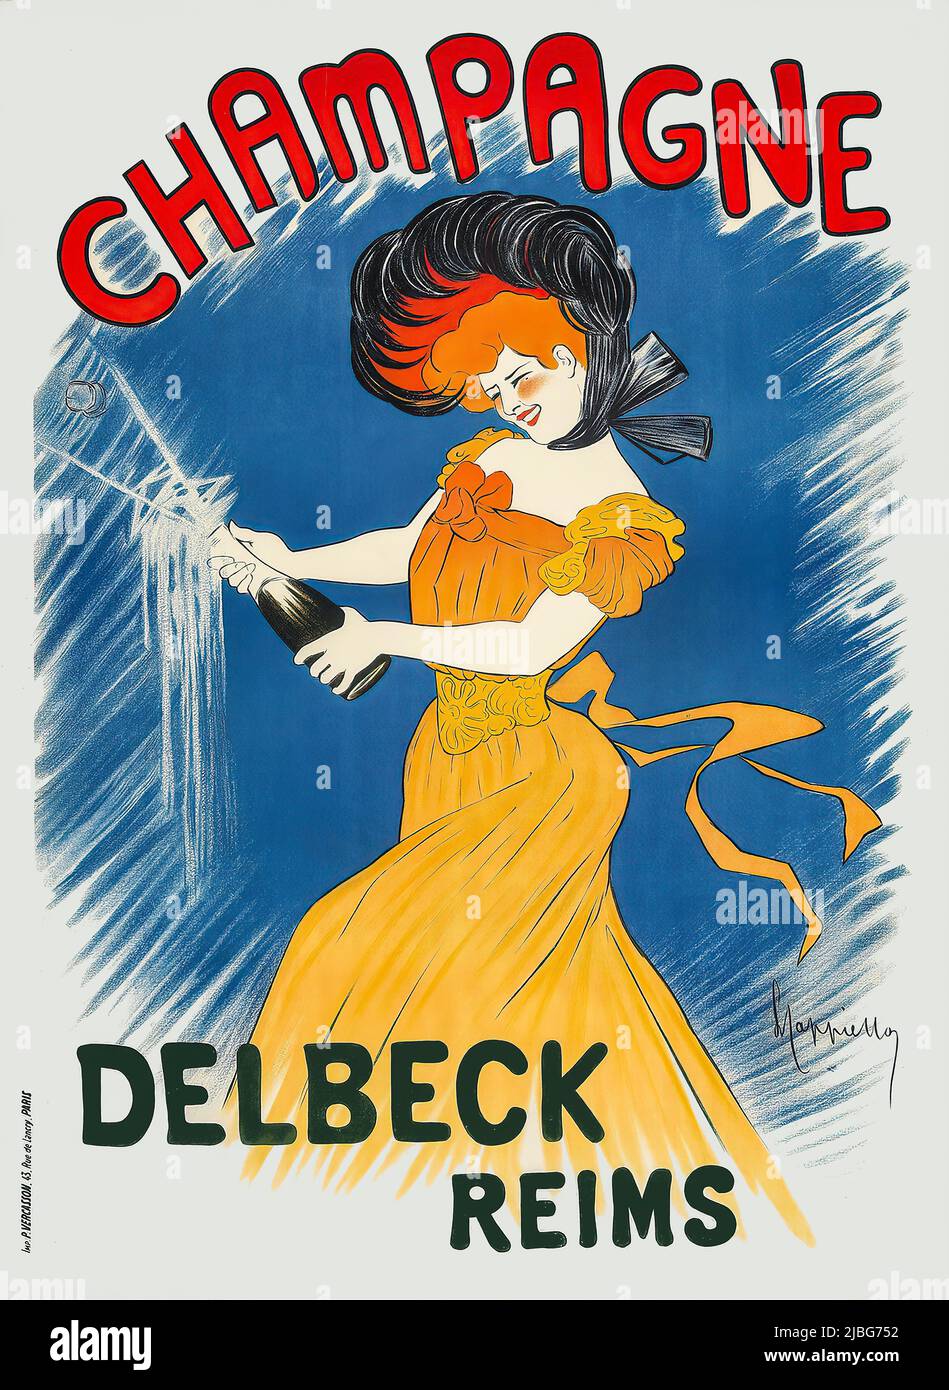 A turn of the 20th century advertising poster by Leonetto Cappiello (1875-1942), showing a woman opening a bottle of Delbeck Champagne. Established in 1832 by Félix-Désiré Delbeck in Reims. Delbeck champagne found favour with the court of Louis-Philippe of France, and was in 1838 named the official Champagne of the French monarchy. Stock Photo